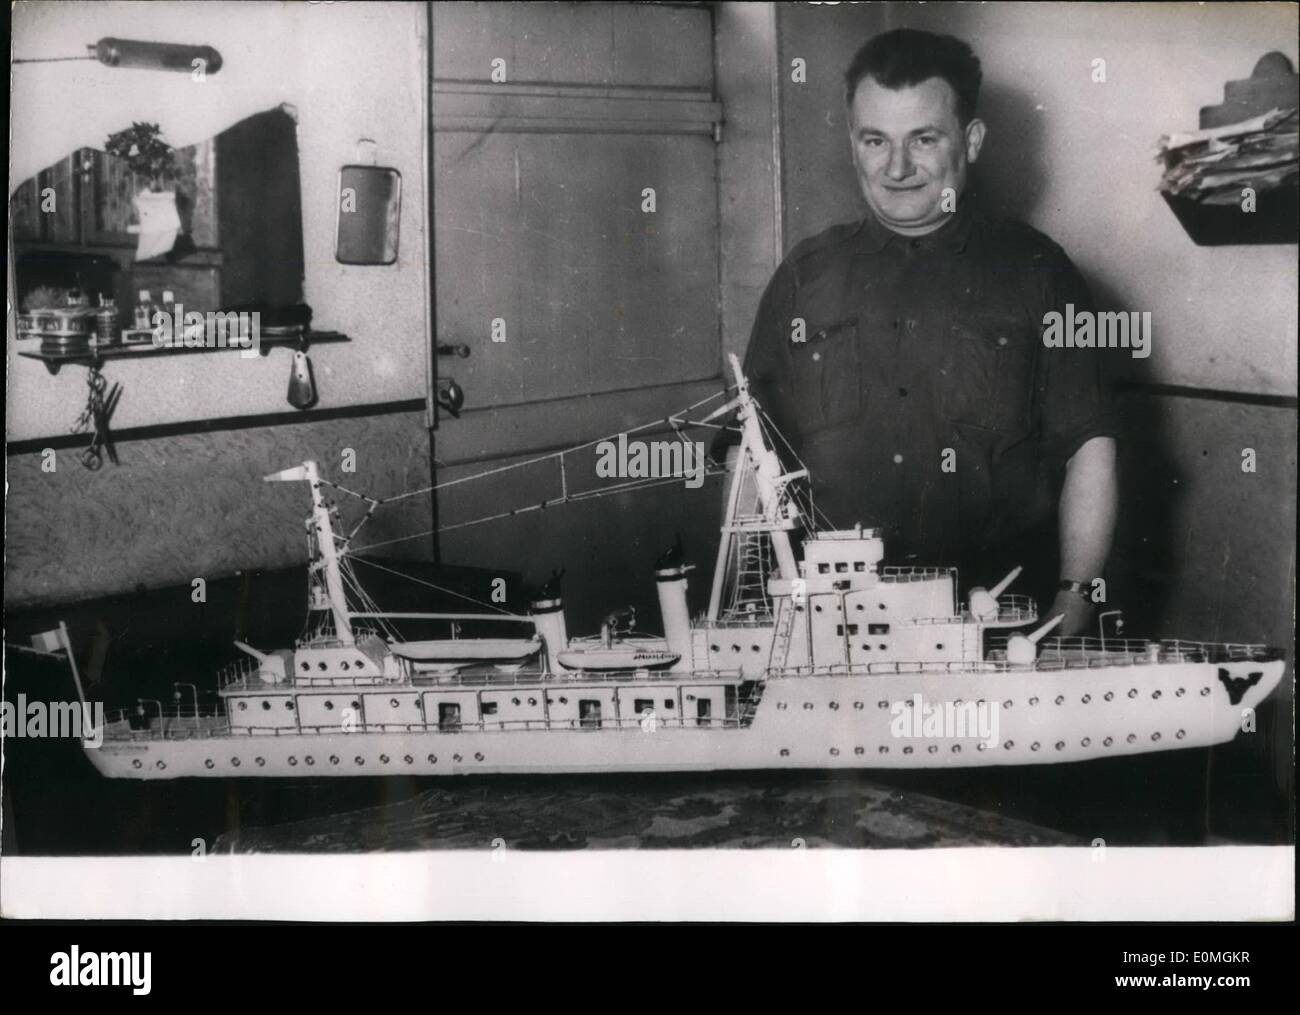 Apr. 04, 1955 - Metz Traffic Policeman Builds Model of Warship: 40- year-old Paul Tanchot, Traffic Policeman at Metz, alsace, with the Small- Scale model of the ship. ''Amiral Charnier''. M. Tanchot was in the navy in his younger days and sailed on the ''Amiral charnier'', it took him 8 months to build this all wooden model. Stock Photo